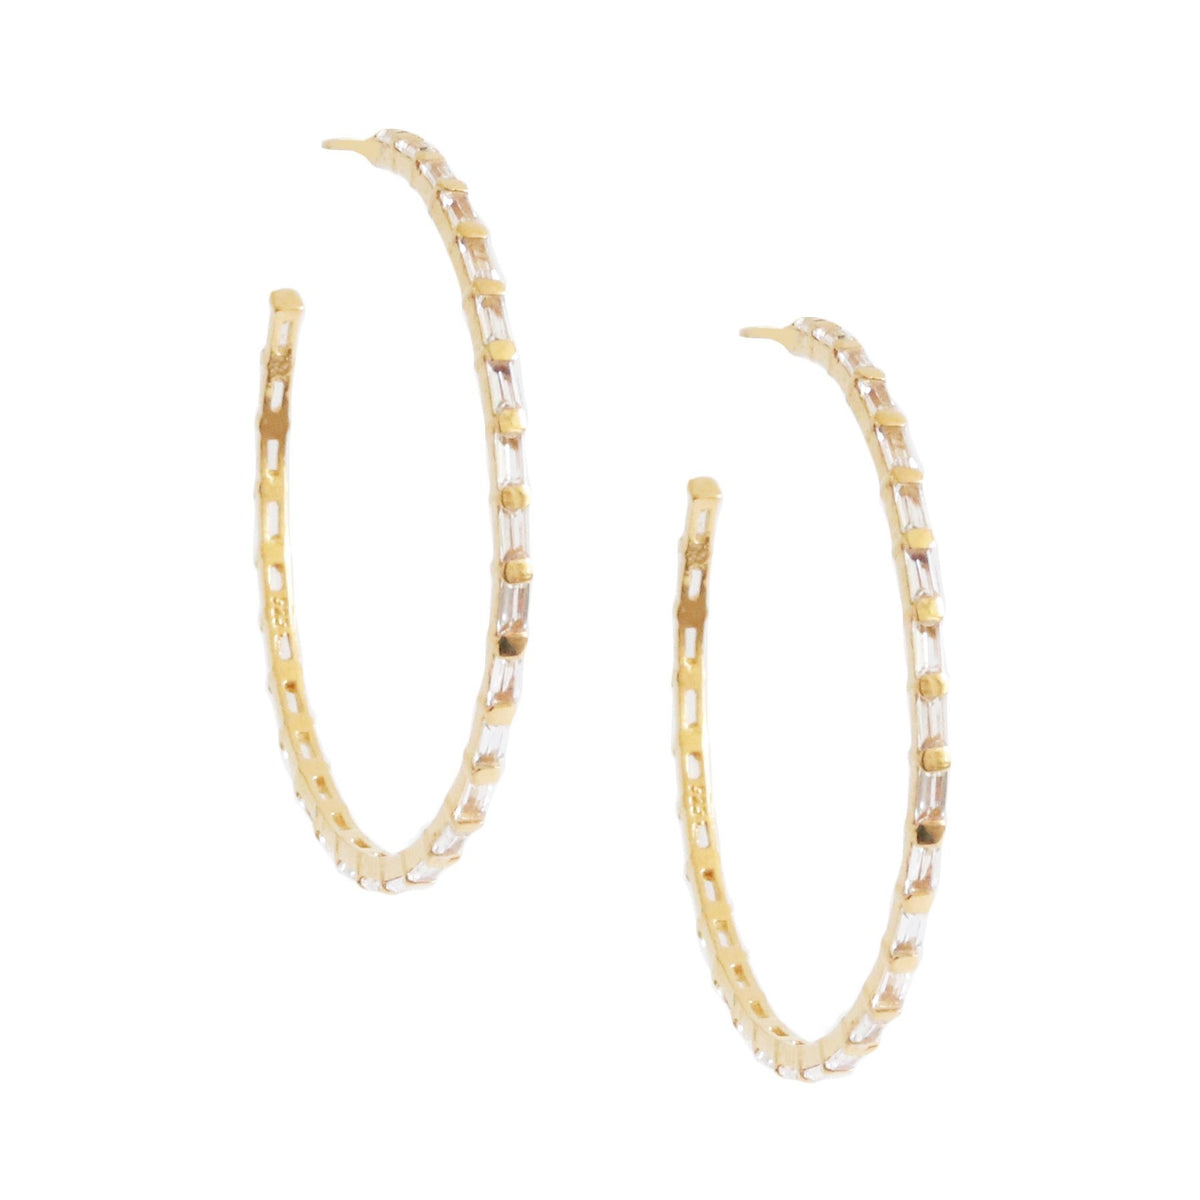 Loyal Studded Large Hoops - White Topaz &amp; Gold - SO PRETTY CARA COTTER